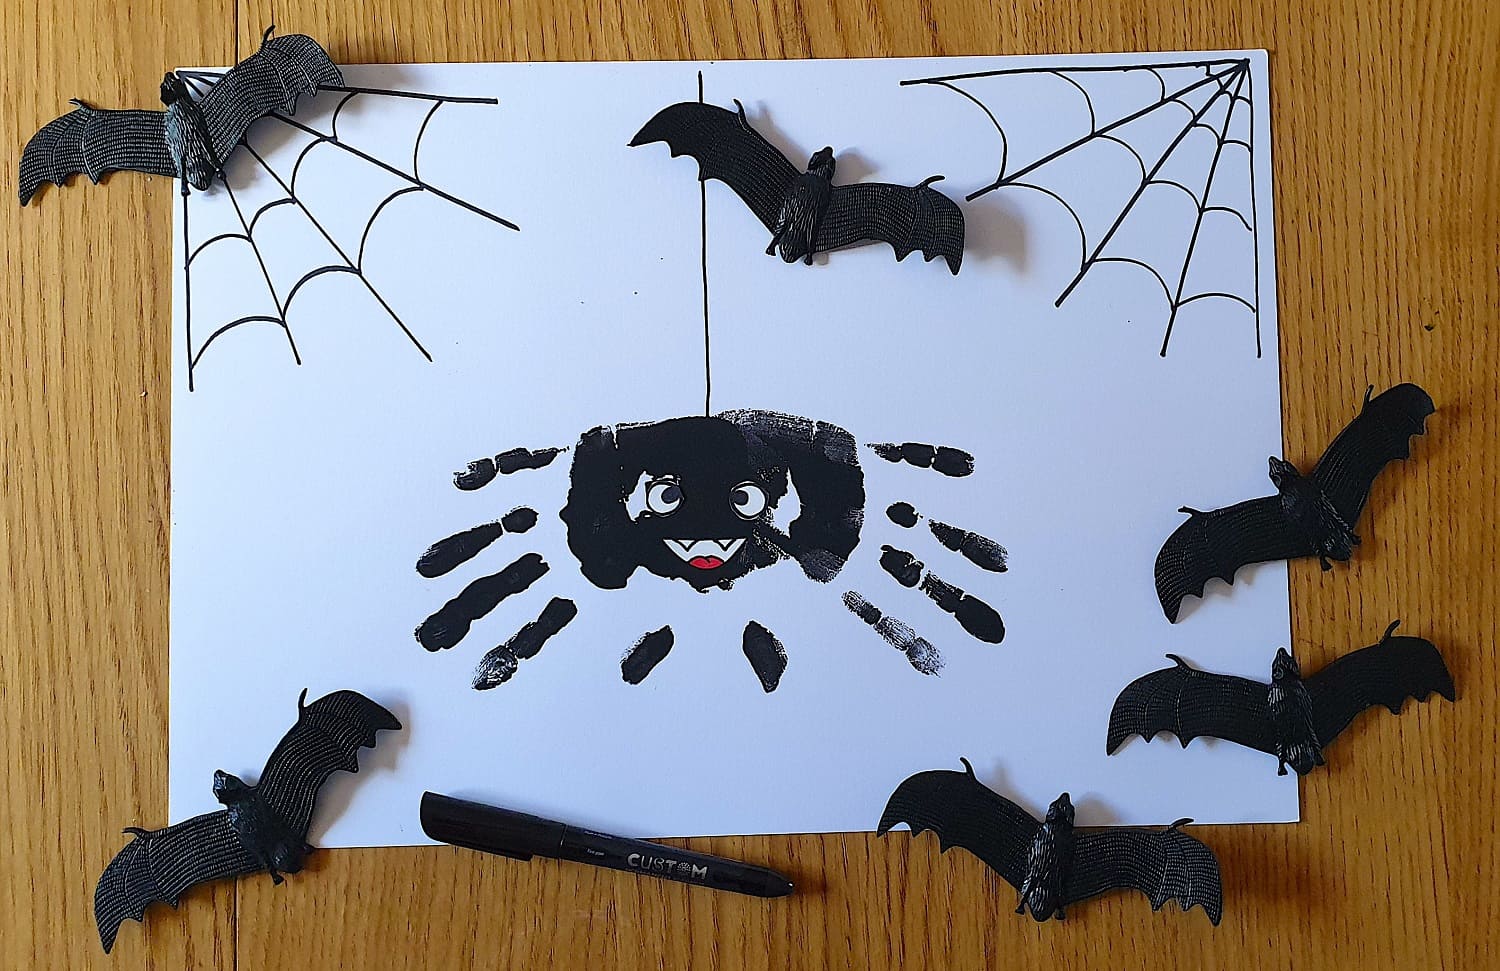 Maped - DIY activity for Halloween - Handprints pictures Spiders - 07